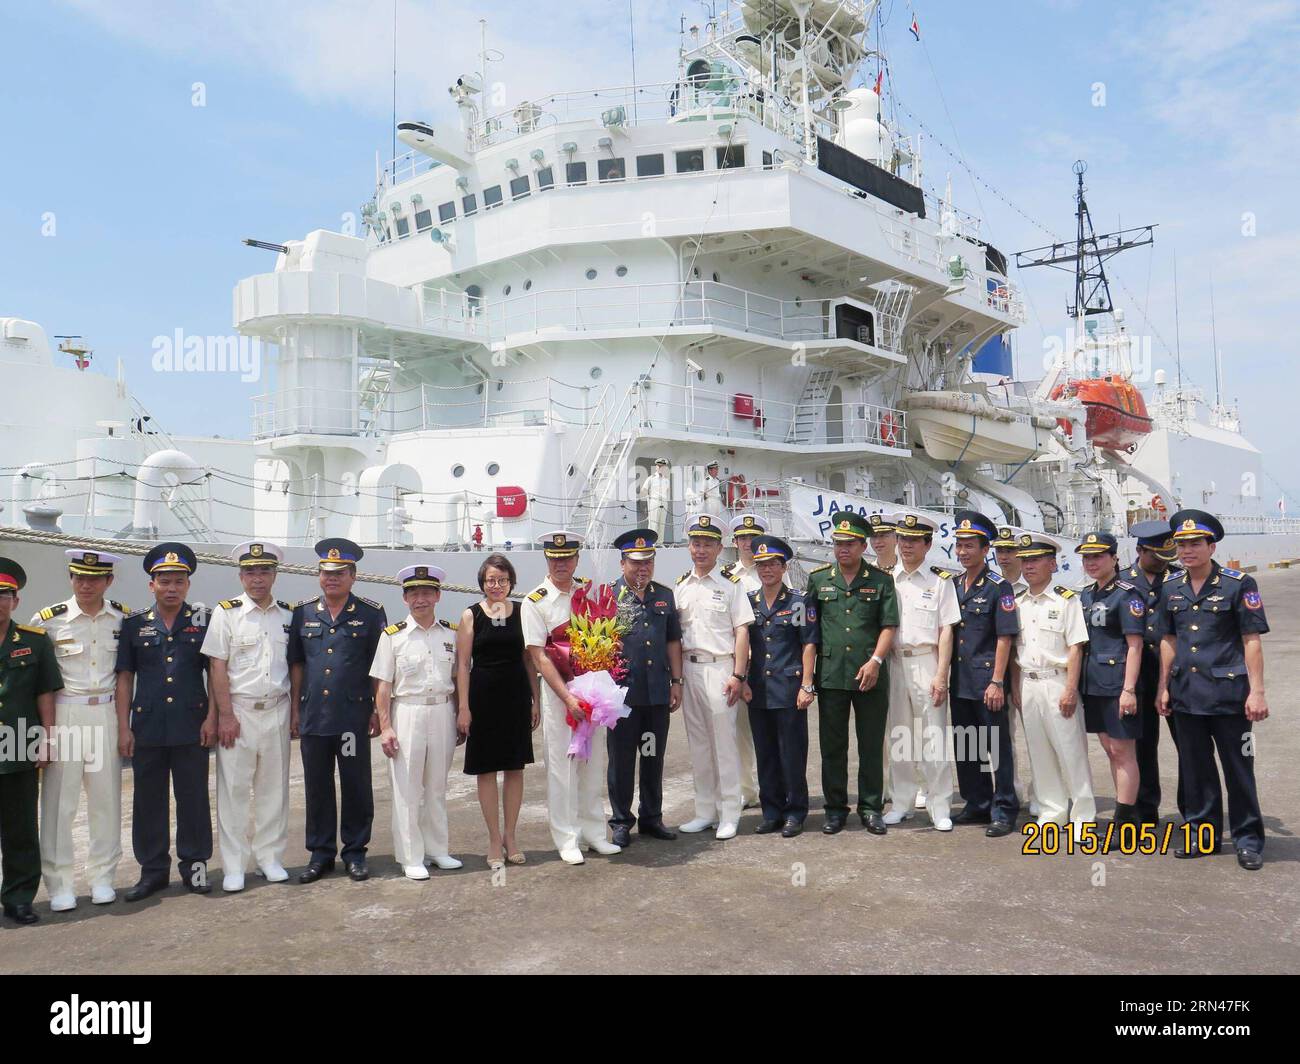 (150510) -- HANOI, May 10, 2015 -- Crew members of the Japan Coast Guard vessel PLH 22 Yashima are welcomed by Vietnamese side at the Tien Sa port in Vietnam s central Da Nang city, on May 10, 2015. The Japan Coast Guard vessel PLH 22 Yashima on Sunday docked at Tien Sa port in Vietnam s central Da Nang city, some 600 km south of capital Hanoi, for a five-day visit. ) VIETNAM-DA NANG-JAPAN COAST GUARD-VISIT VNA PUBLICATIONxNOTxINxCHN   150 510 Hanoi May 10 2015 Crew Members of The Japan Coast Guard Vessel  22  are WELCOMED by Vietnamese Side AT The Tien Sat Port in Vietnam S Central there Nang Stock Photo